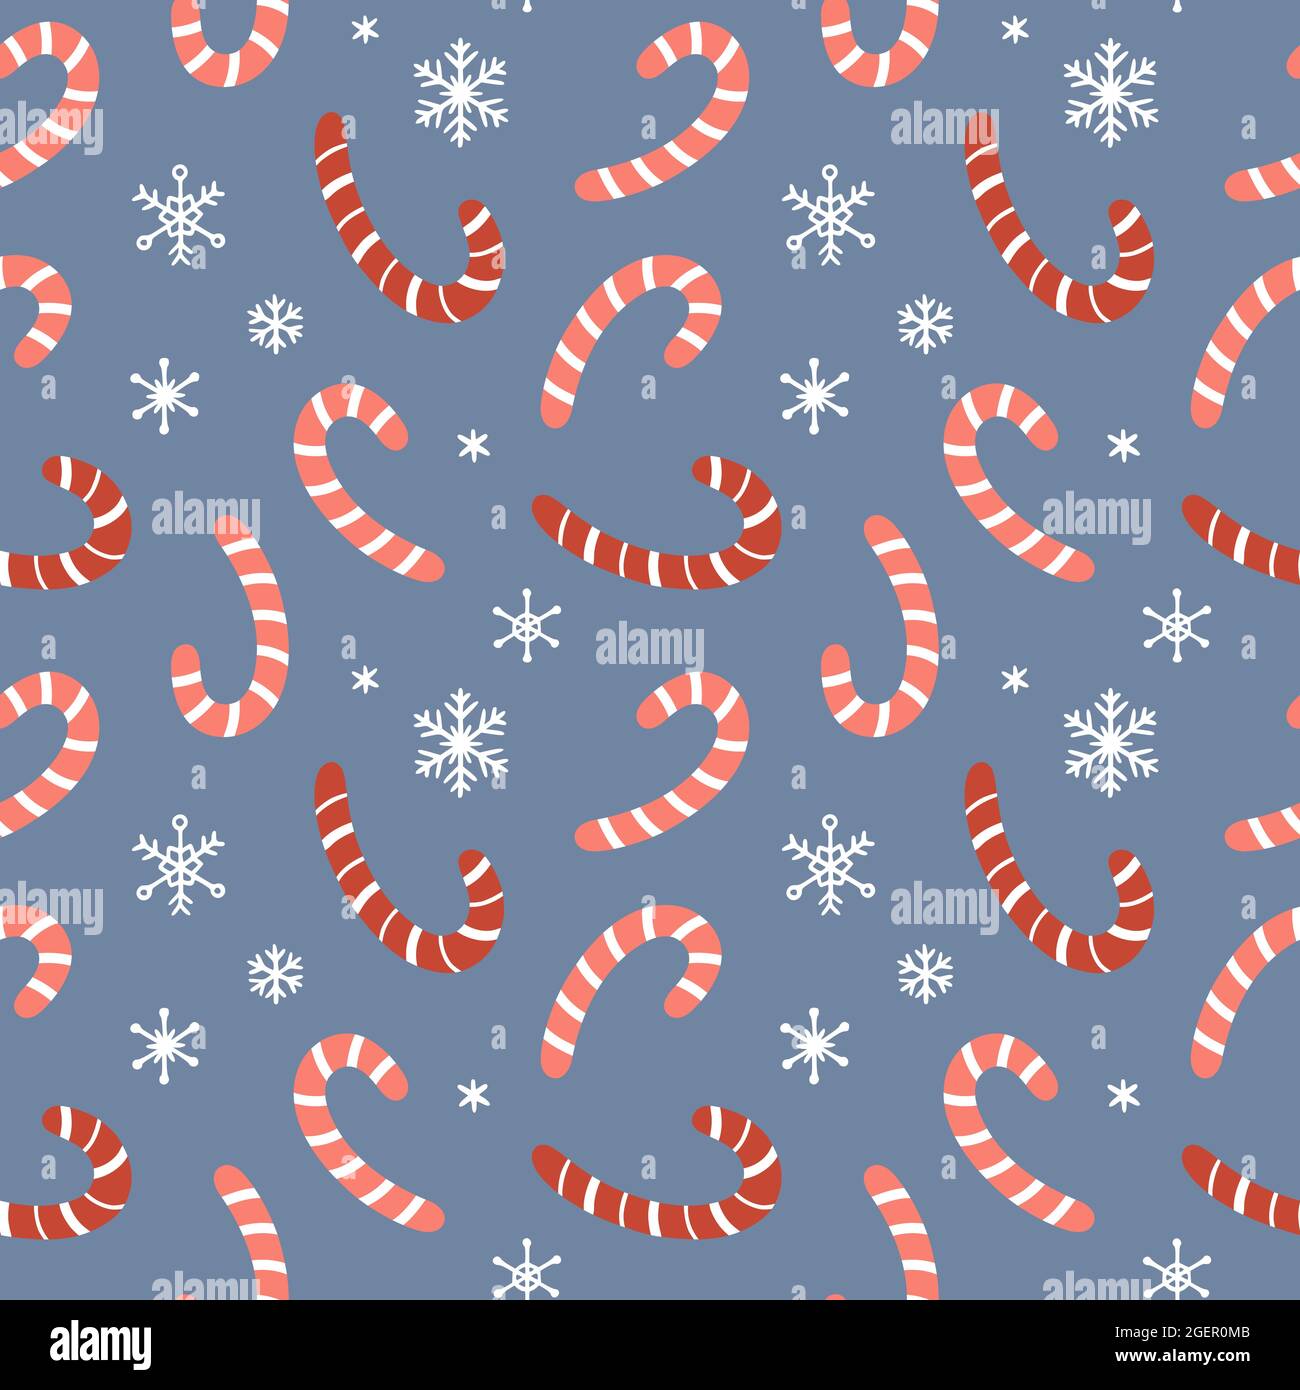 Candy Cane Background Images HD Pictures and Wallpaper For Free Download   Pngtree